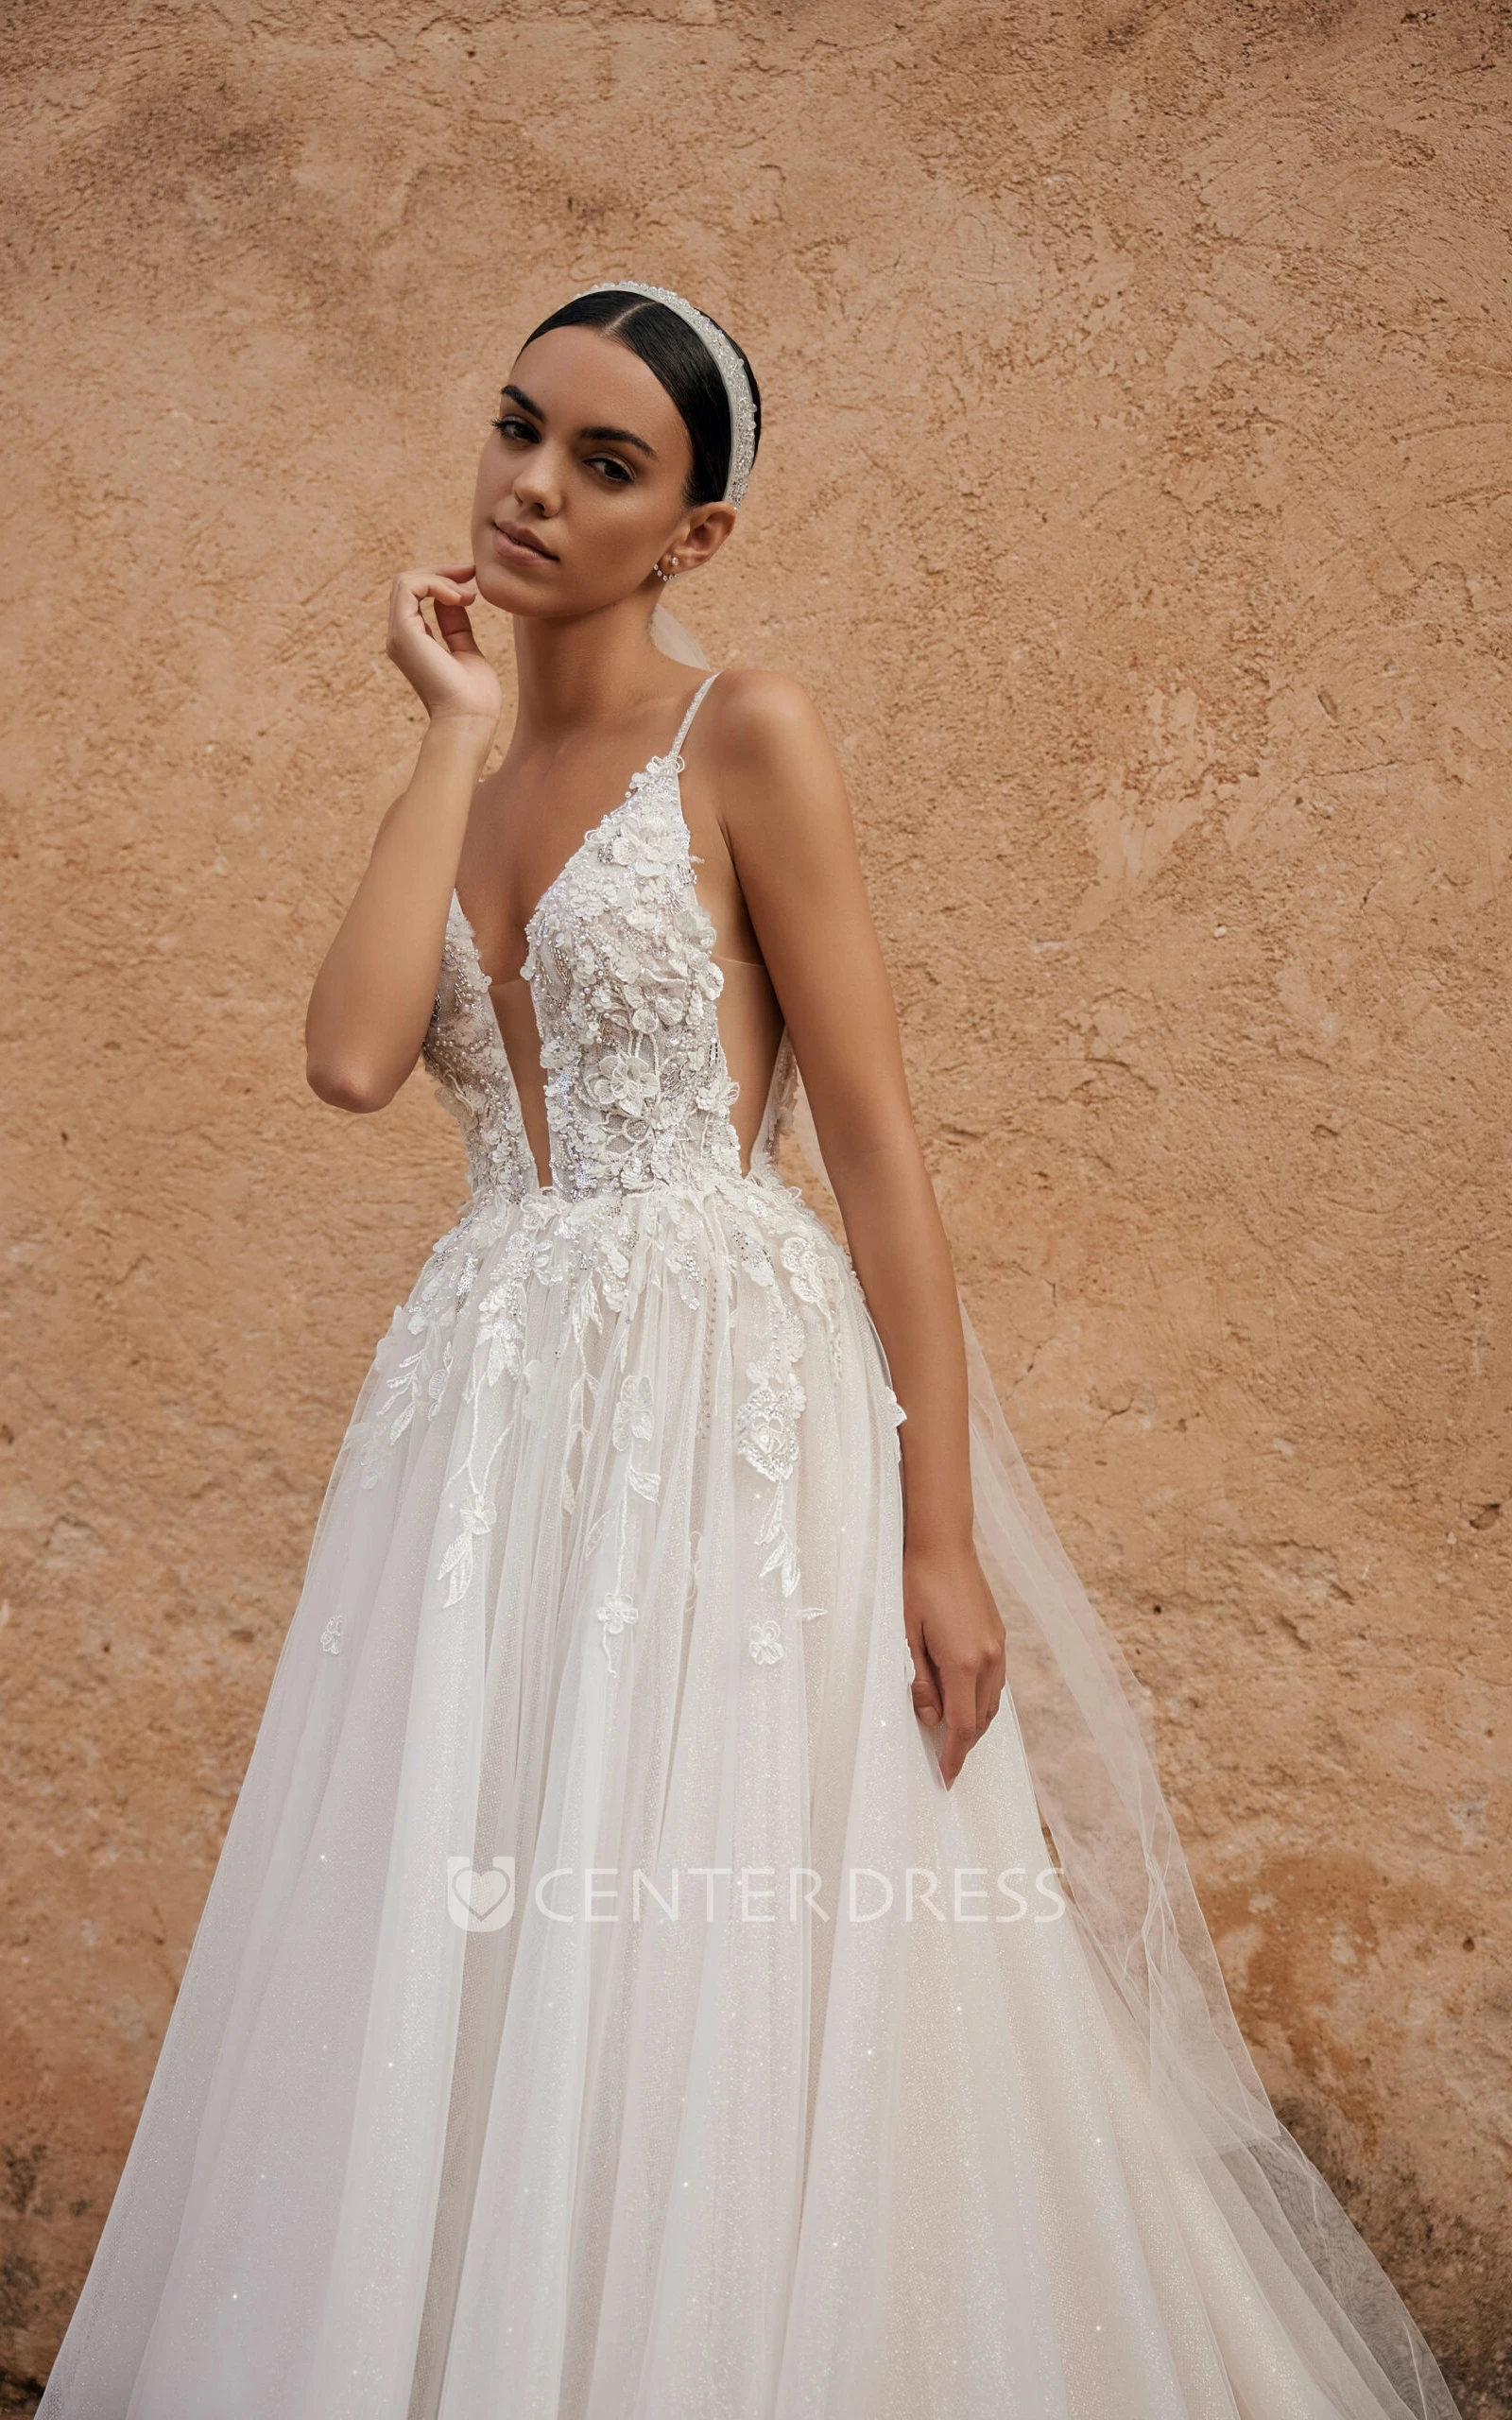 Princess A-line Halter Sleeveless Court Train Lace Tulle Wedding Dress With  Appliques Sequins